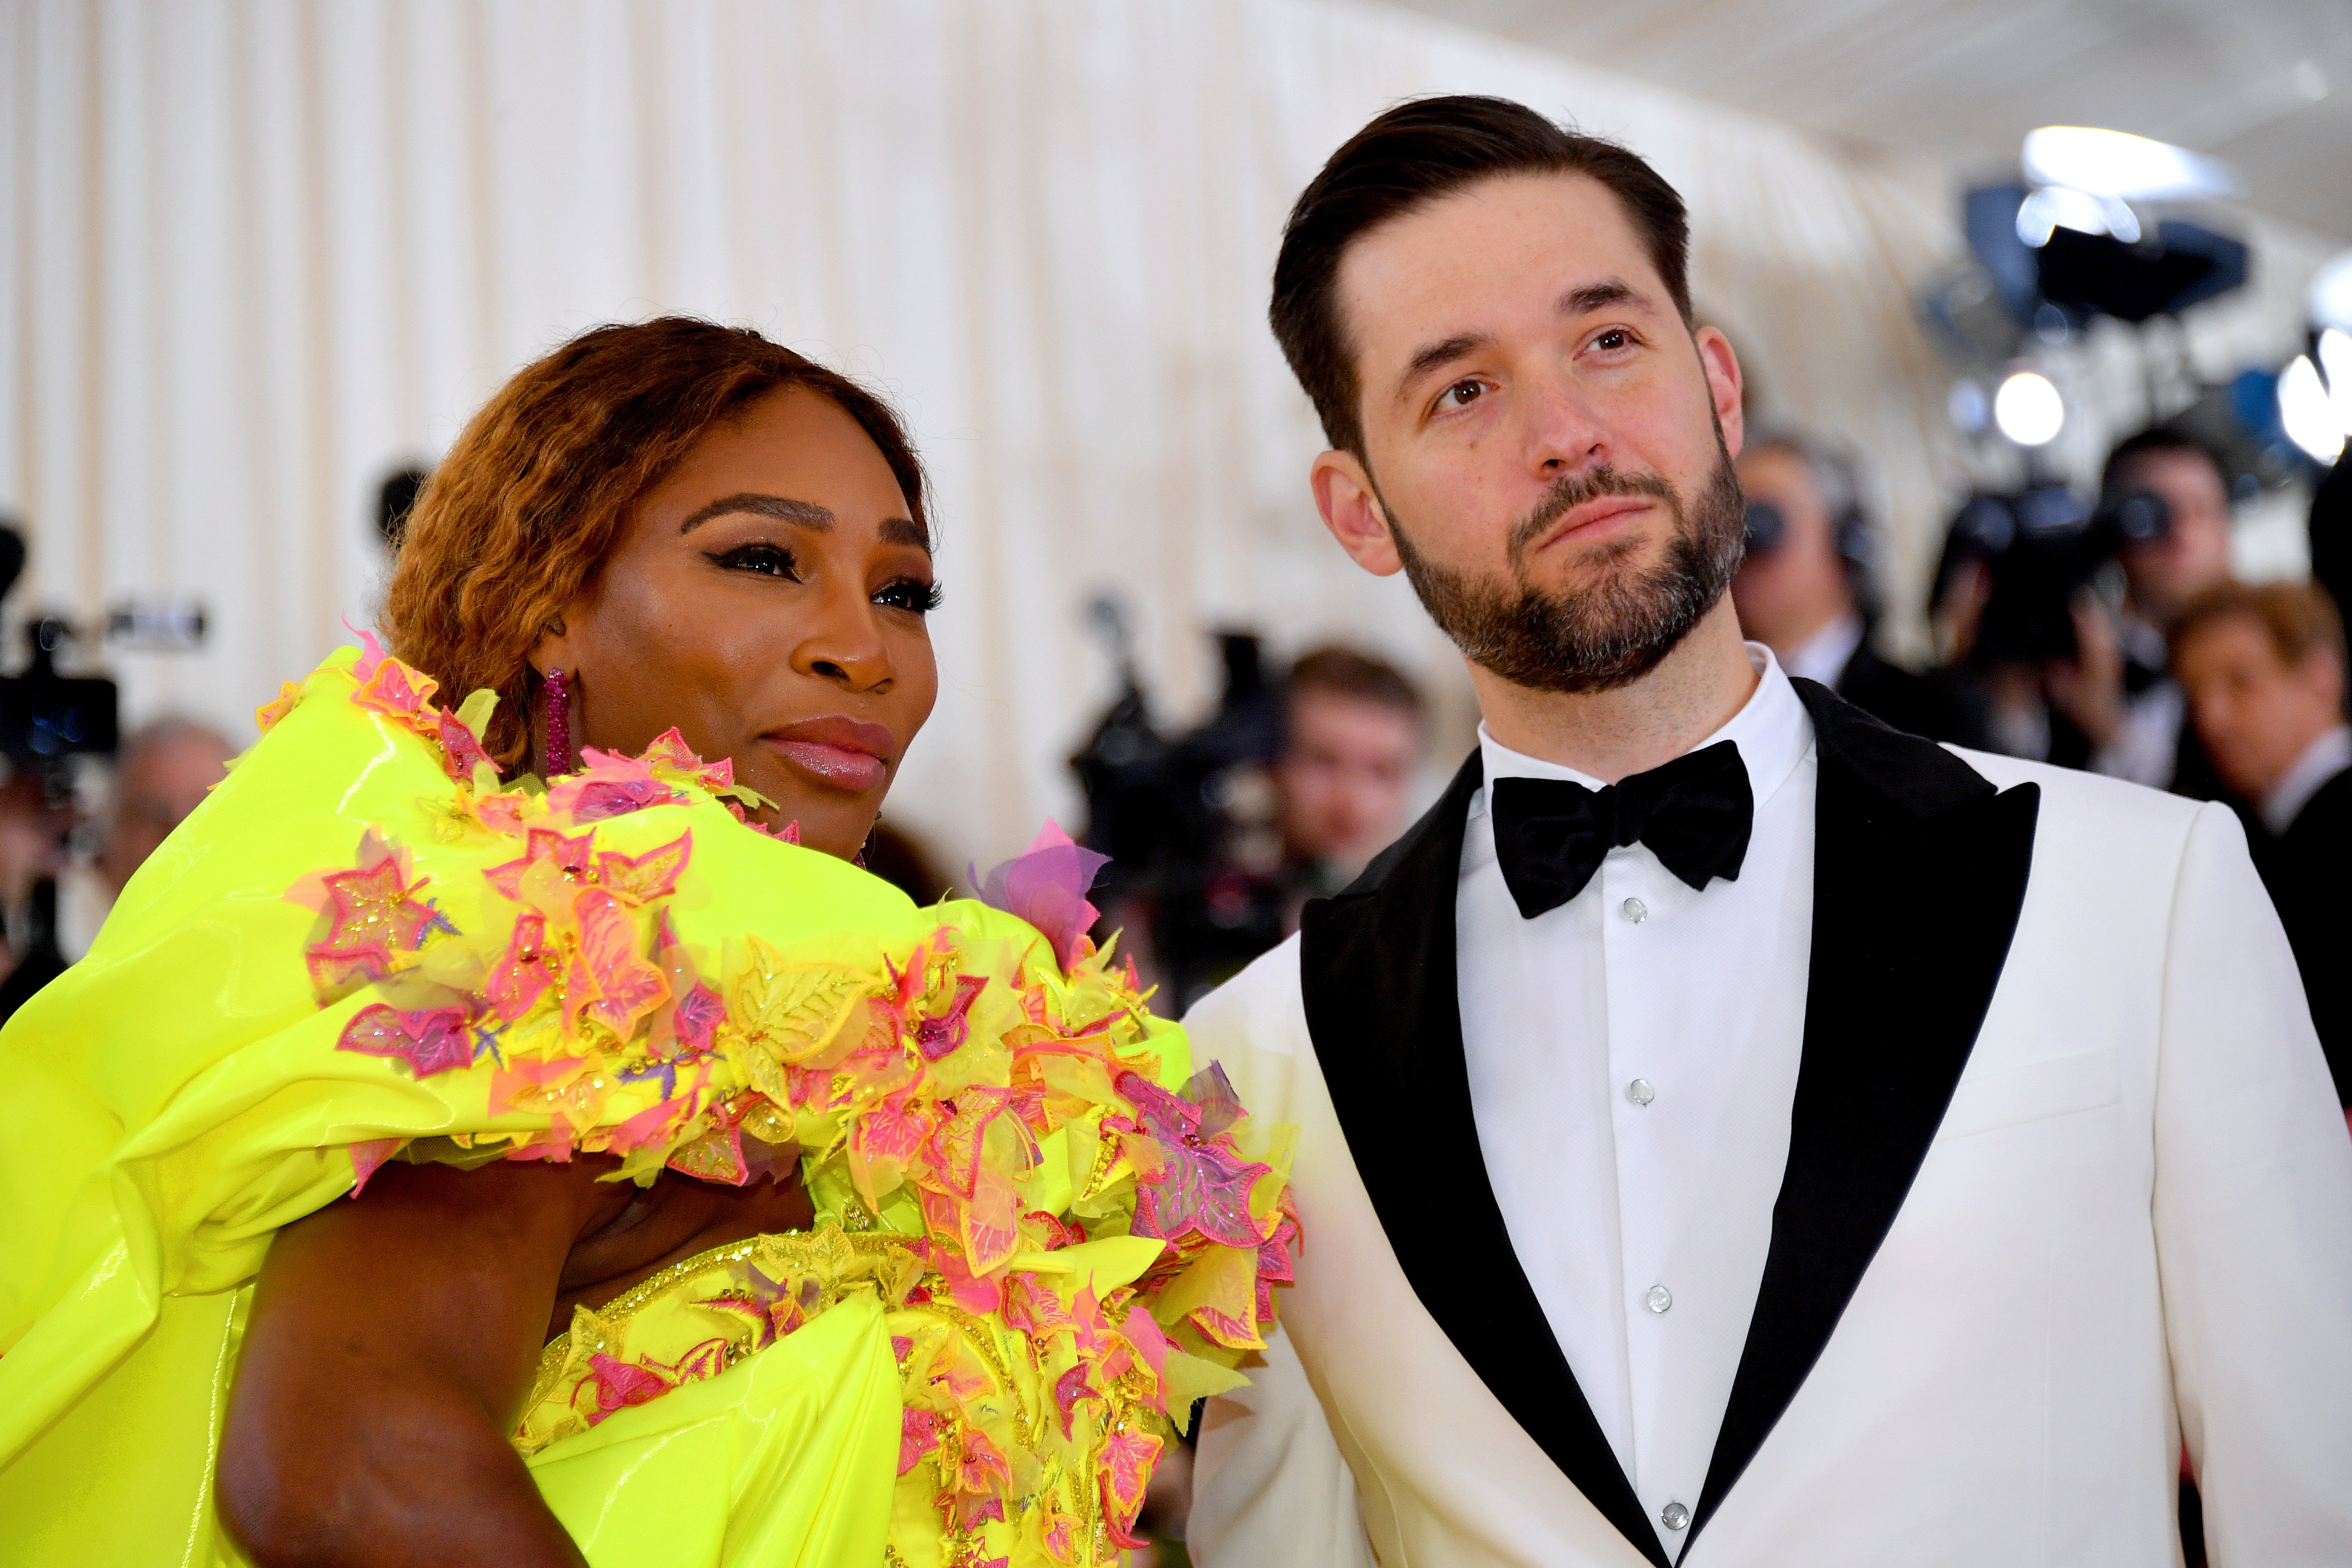 Serena Williams and Alexis Ohanian at The Met Gala Celebrating Camp: Notes on Fashion on May 6, 2019, in New York City. | Source: Dia Dipasupil/FilmMagic/Getty Images